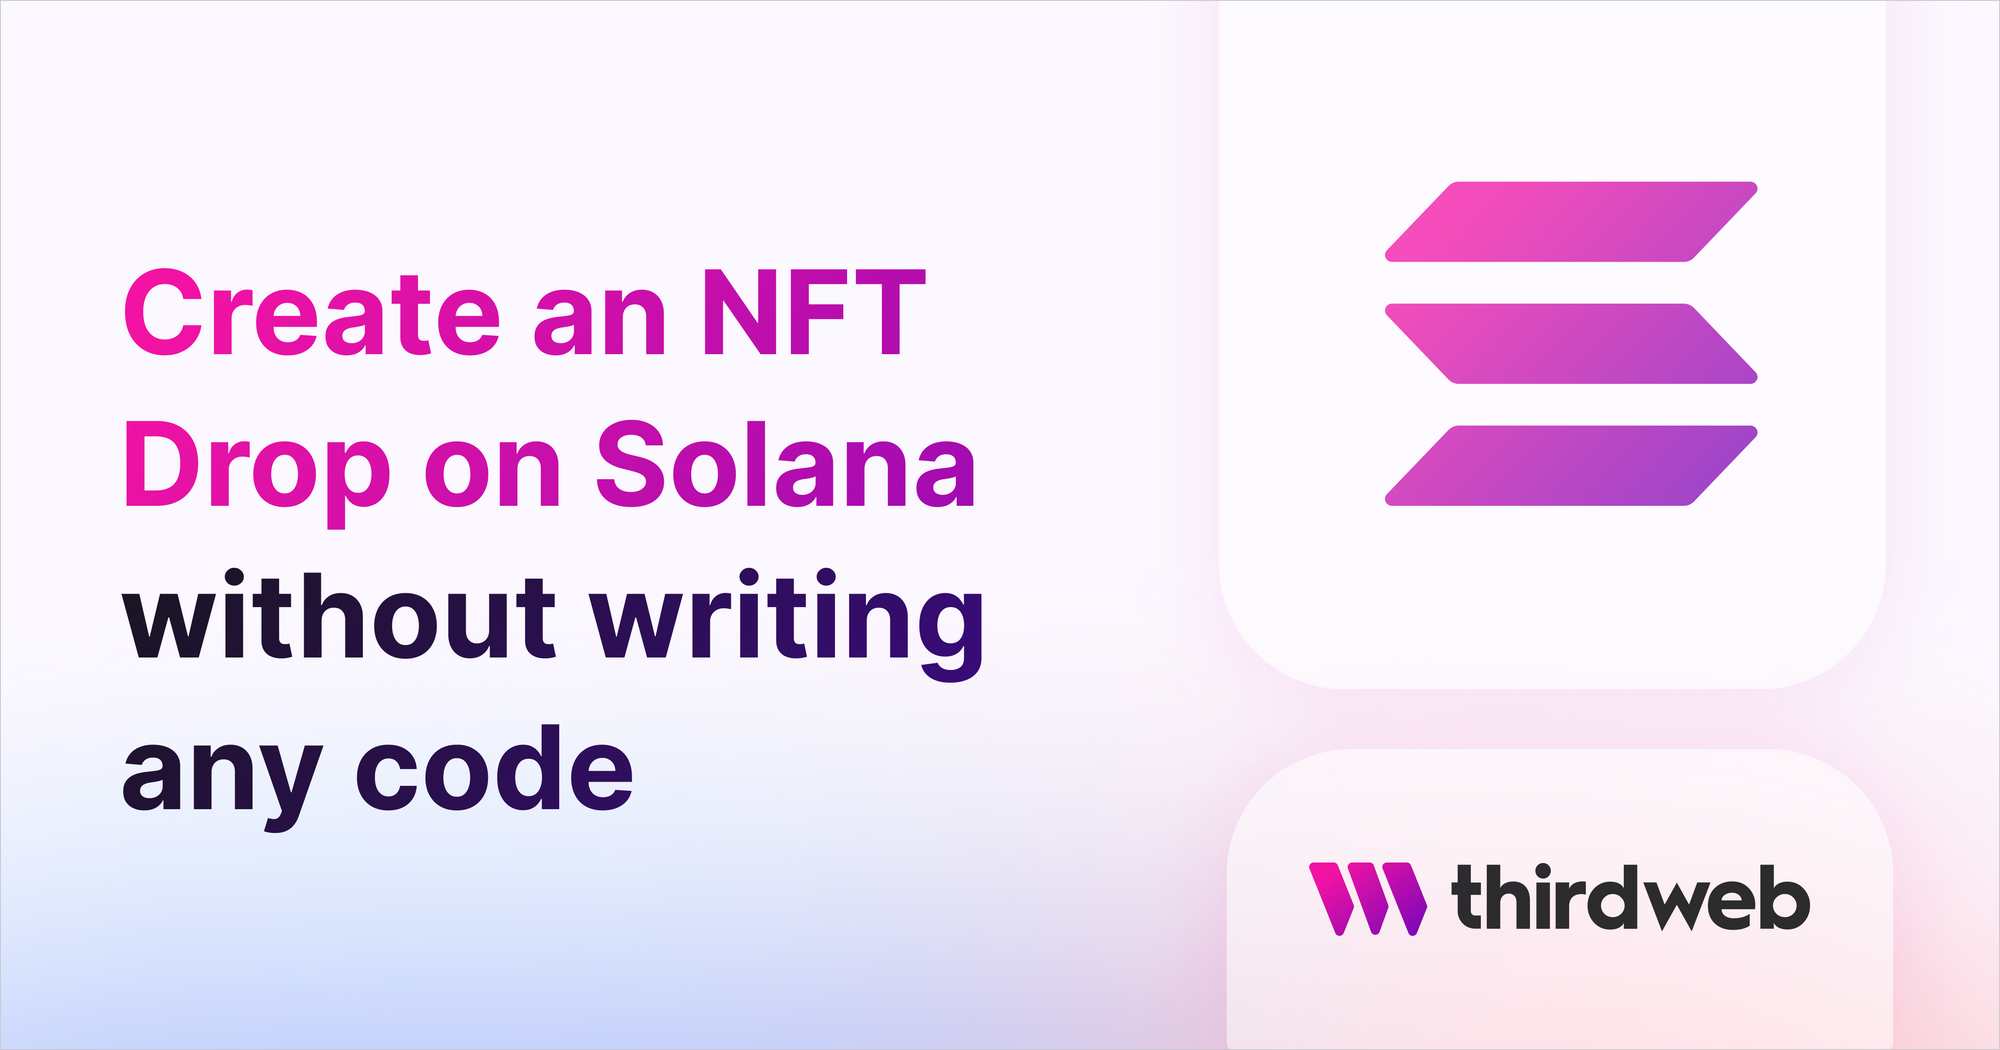 How to Create an NFT Drop on Solana without writing any code